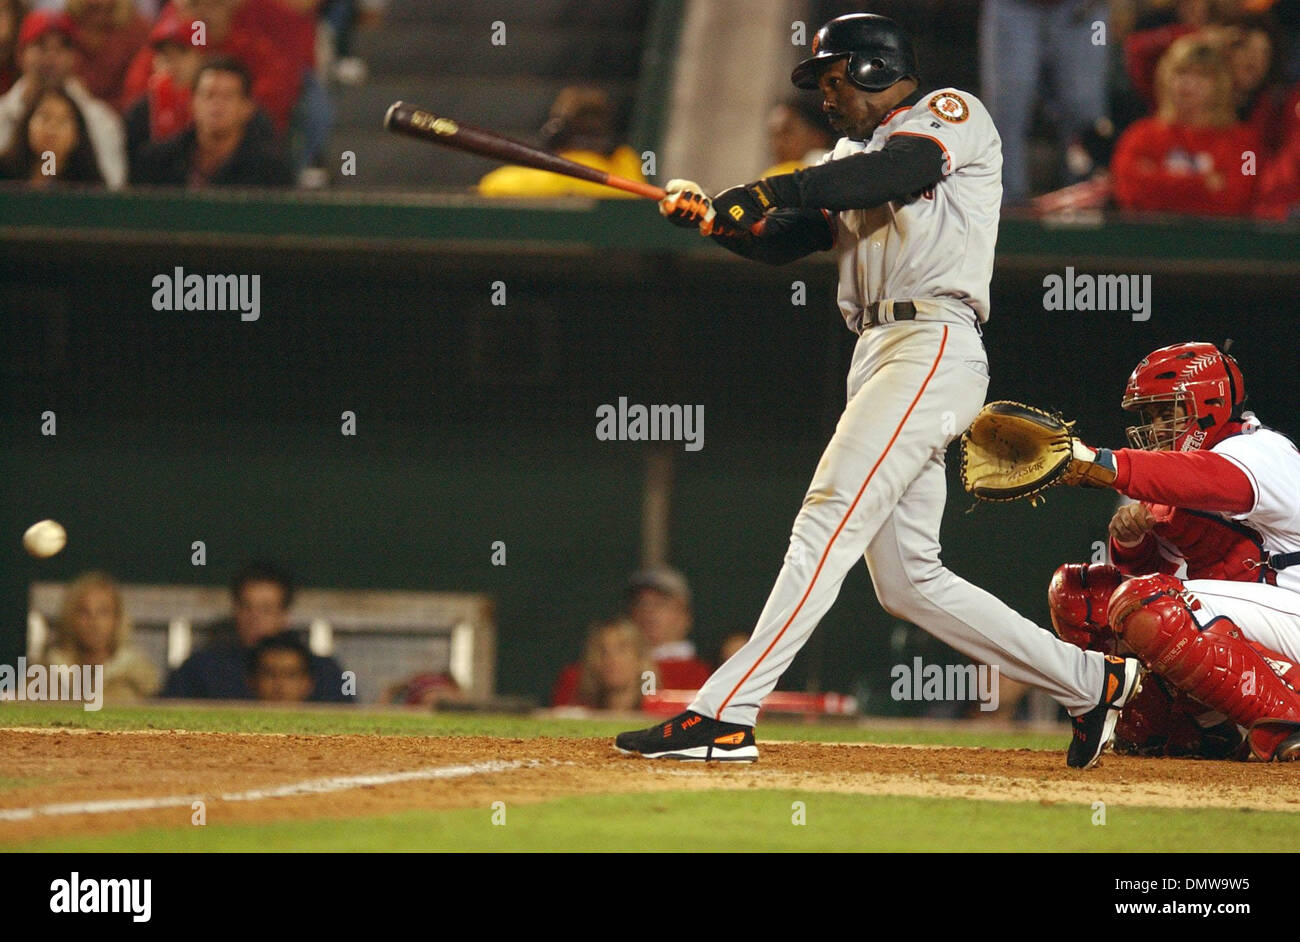 Oct 20, 2002 - Anaheim, CA, USA - San Francisco Giant SHAWON DUNSTON  singles in the fifth driving in J. T. Snow during game 2 of the 2002 World  Series against the